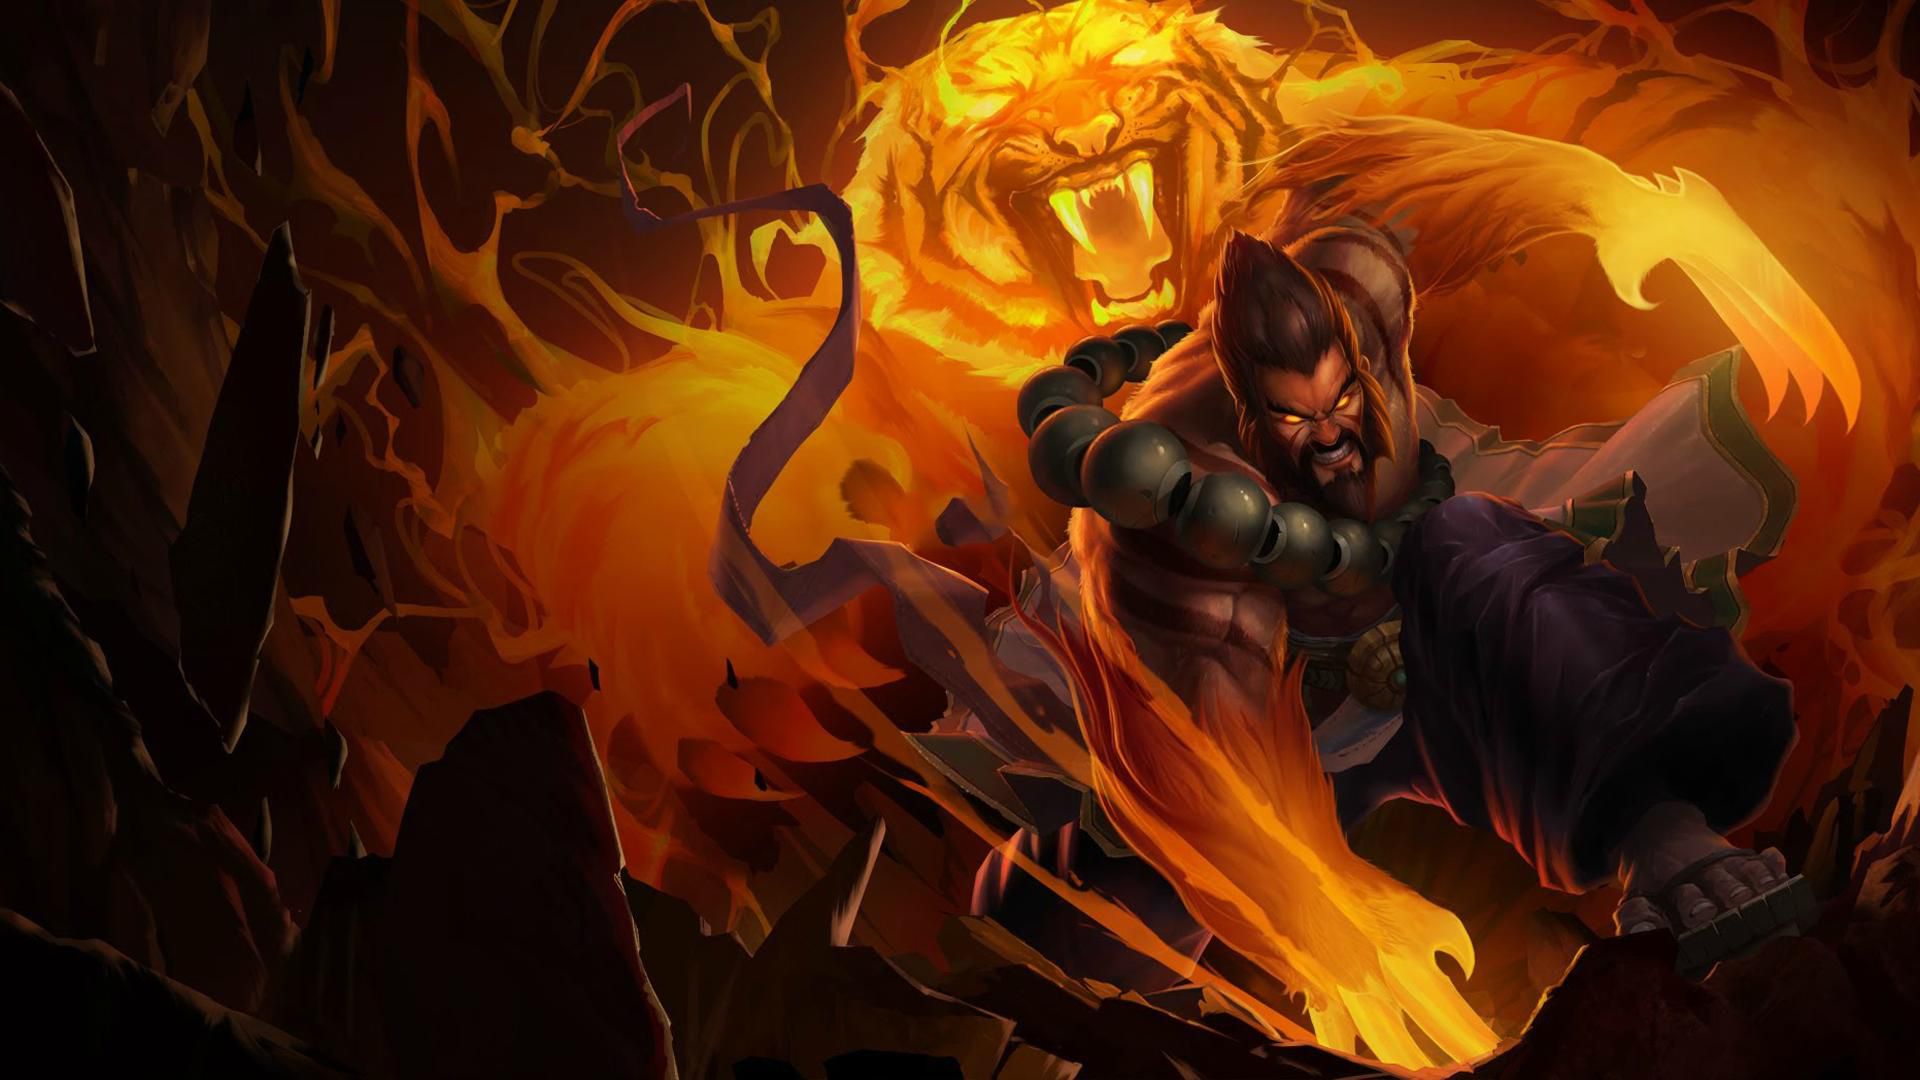 League of Legends HD Wallpapers Free Download